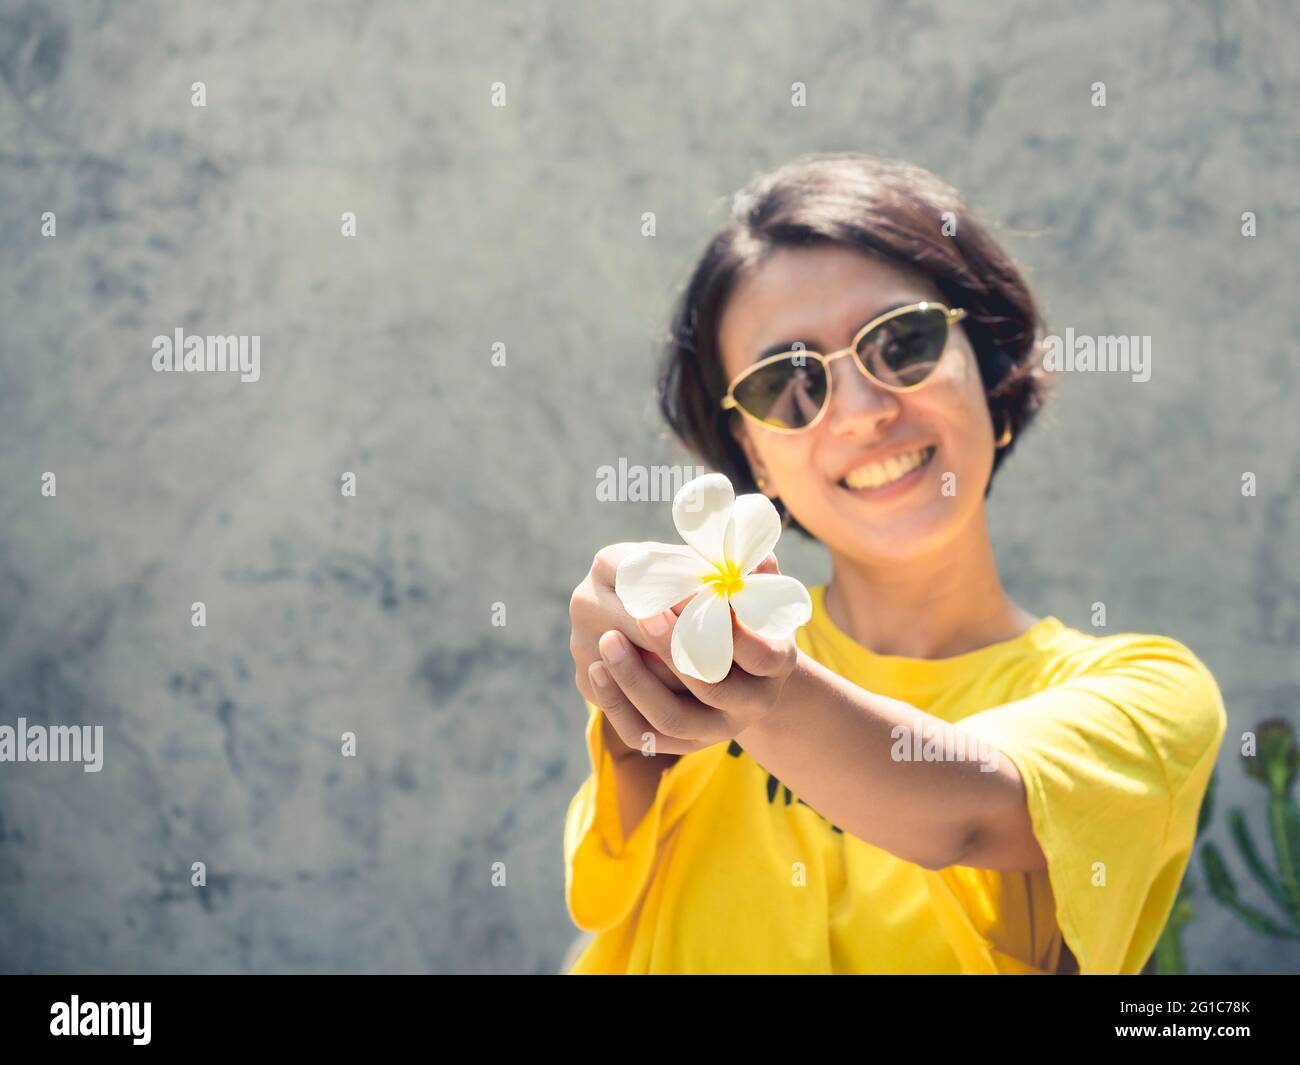 Summertime. Smile with the sunshine. The white plumeria flower on hand of beautiful Asian woman short hair wearing sunglasses and yellow shirt on conc Stock Photo